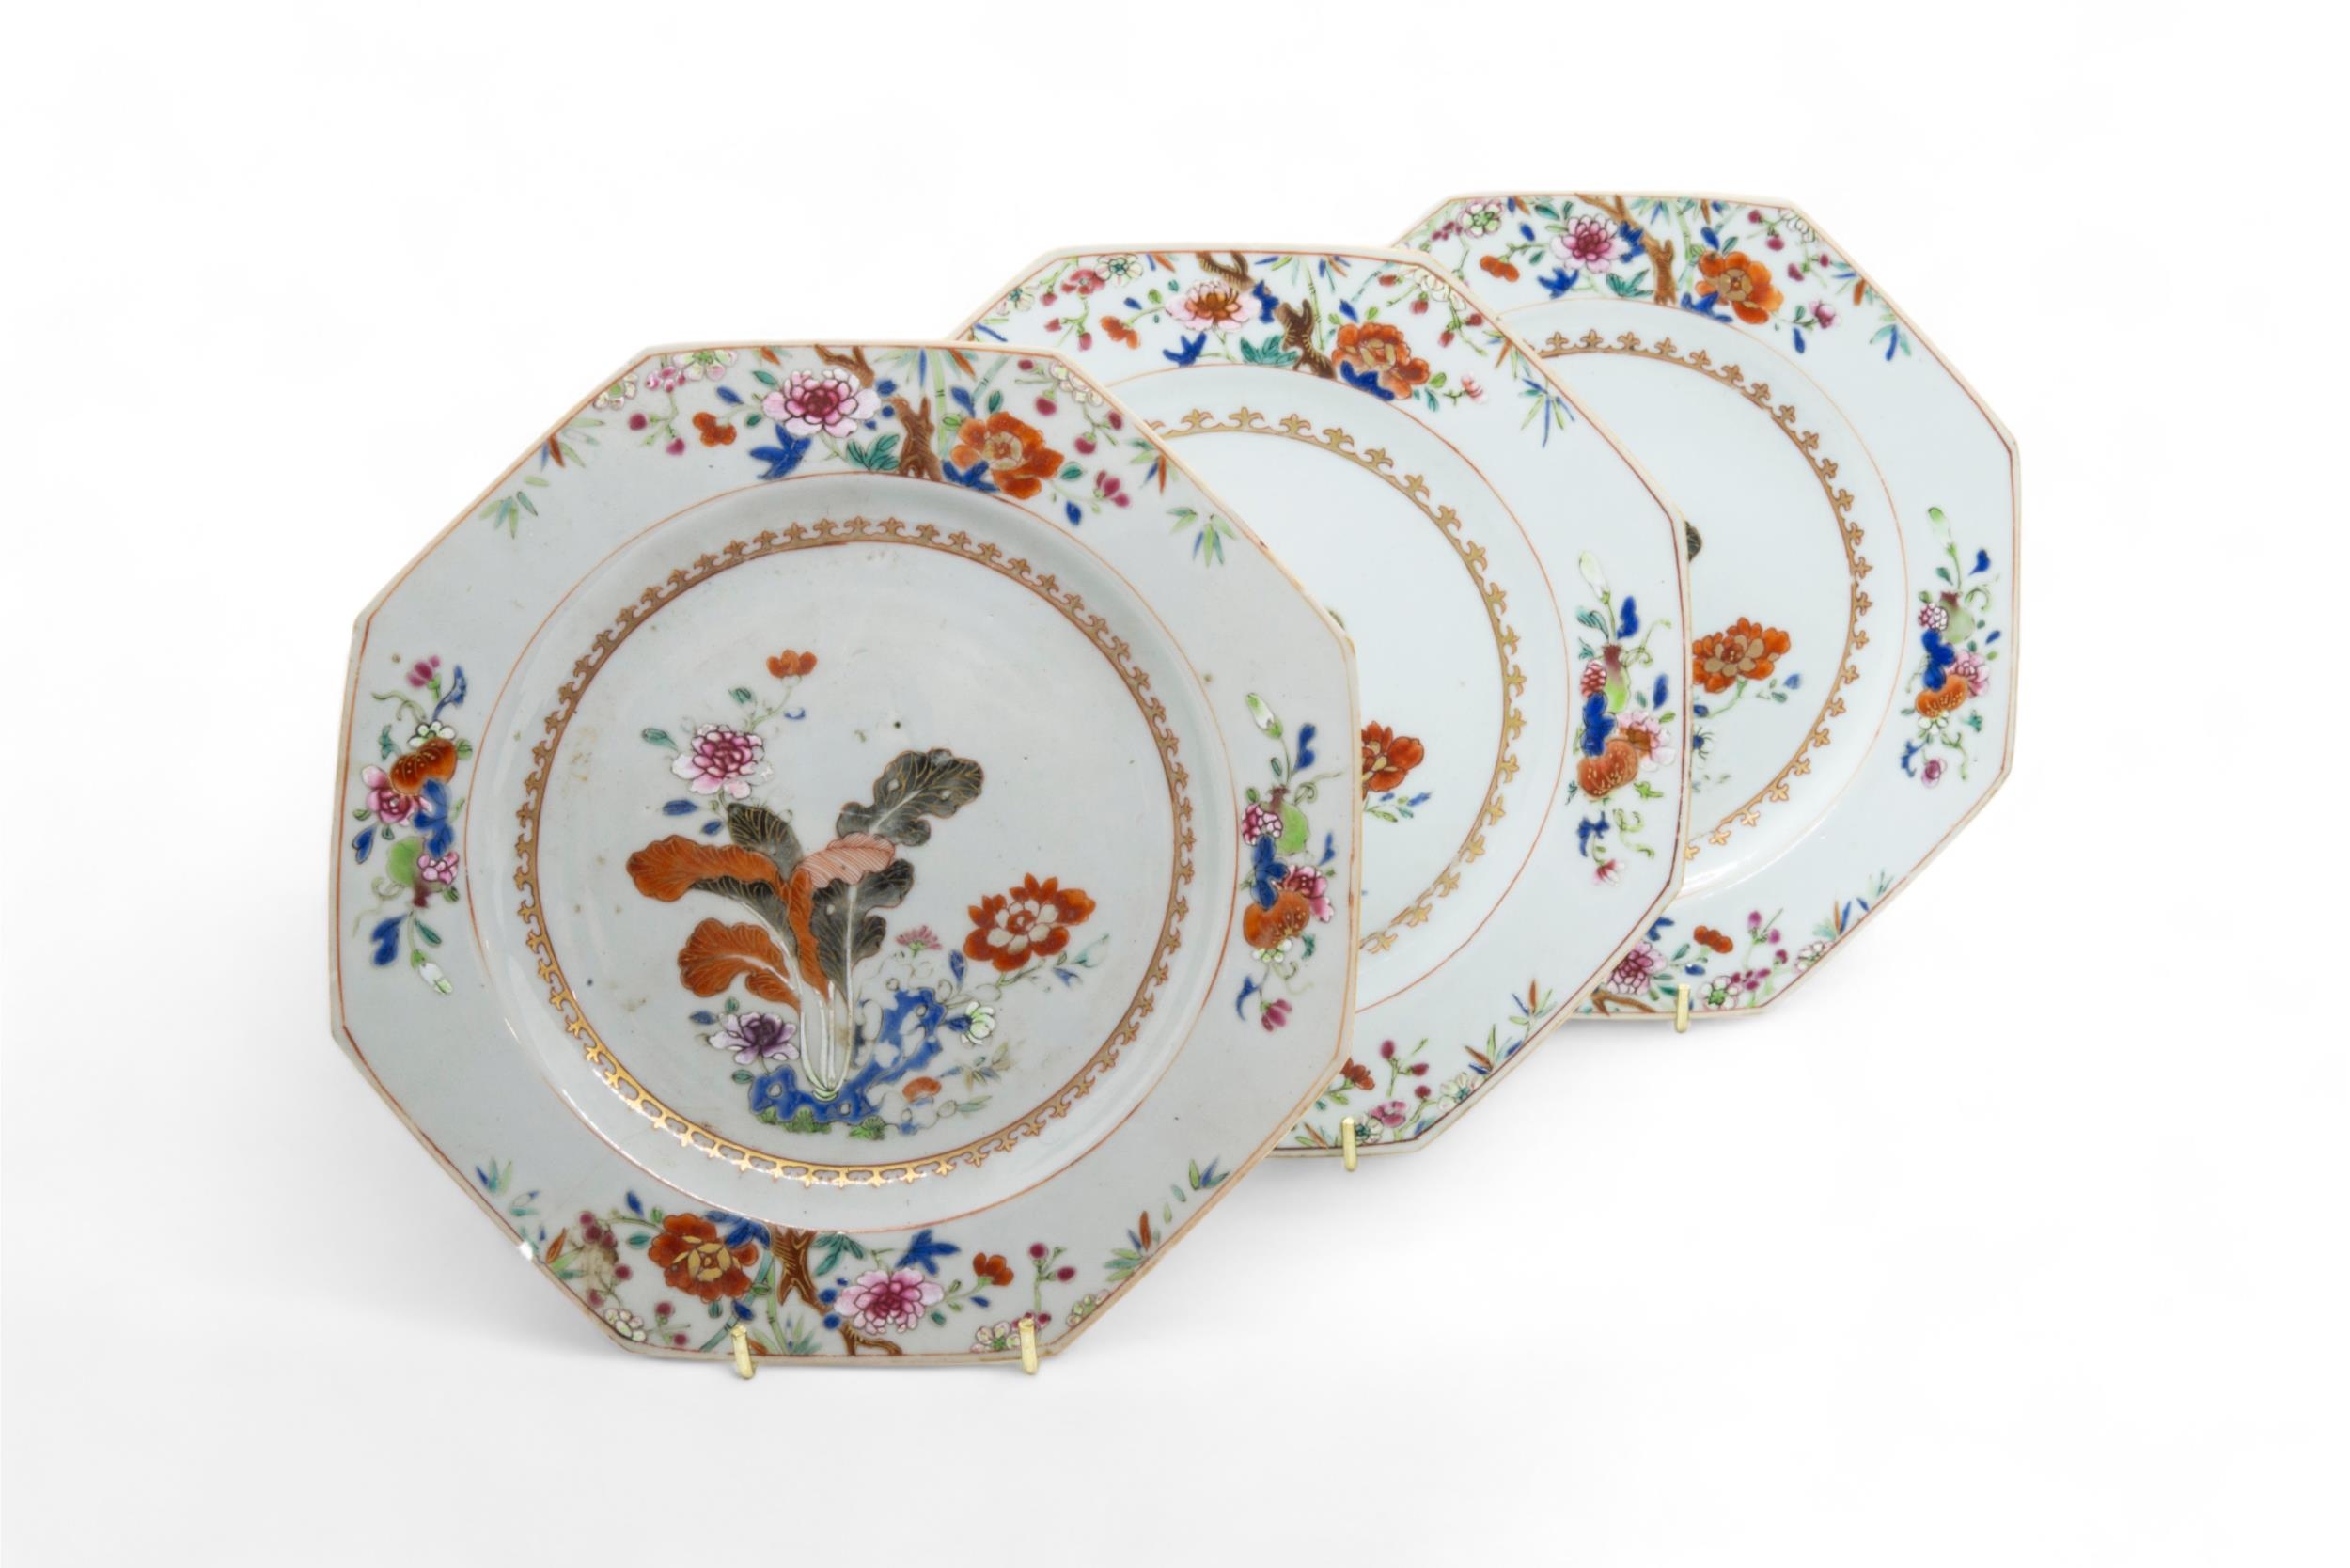 A GROUP OF FOURTEEN CHINESE EXPORT DISHES QING DYNASTY, 18TH CENTURY 22cm - 23cm diam approx - Image 2 of 8